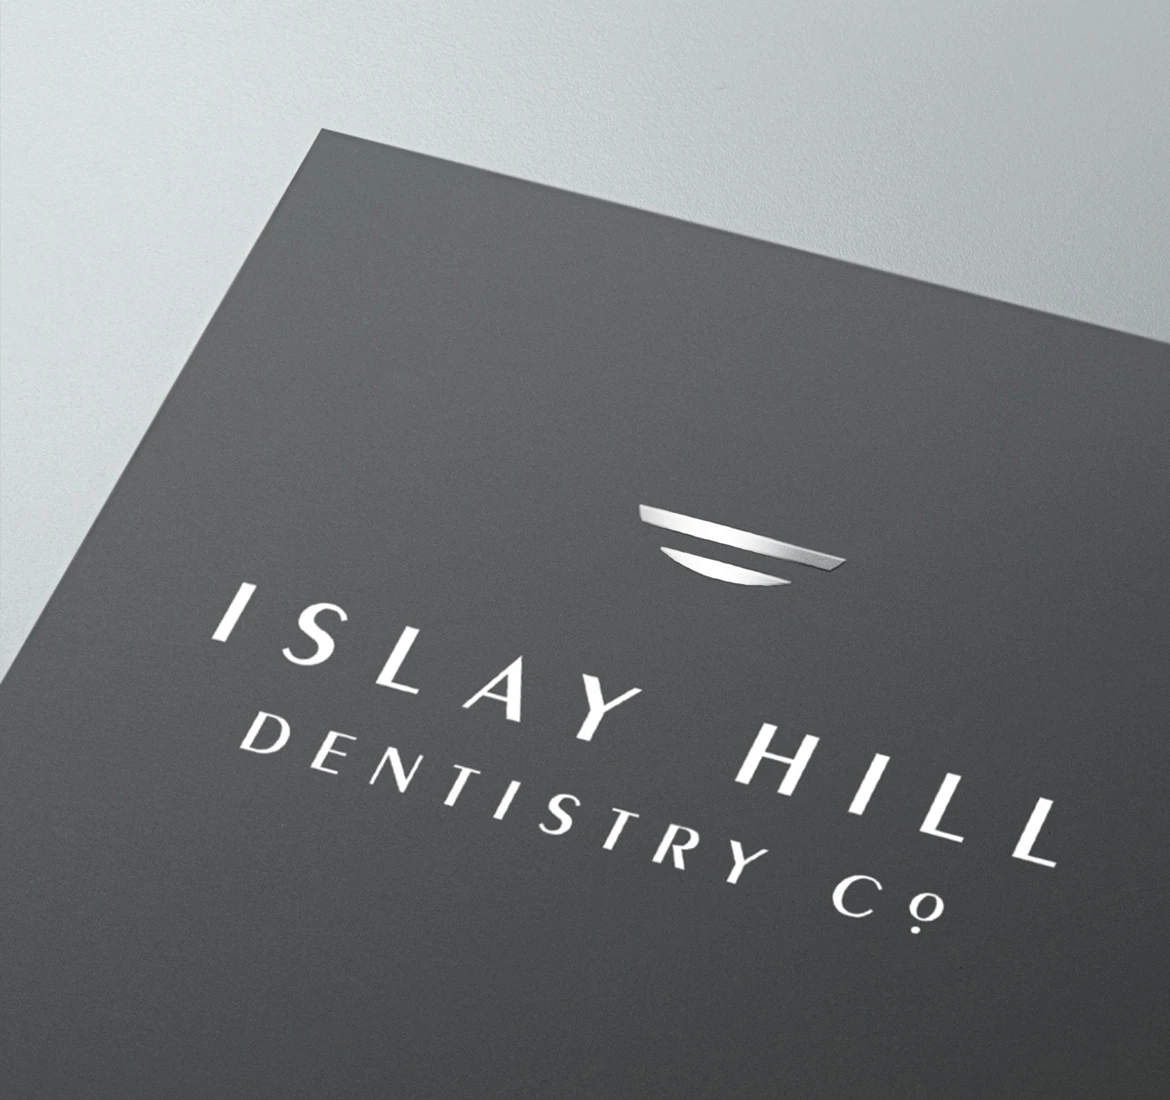 Islay HIll Dentistry Company business cards close-up